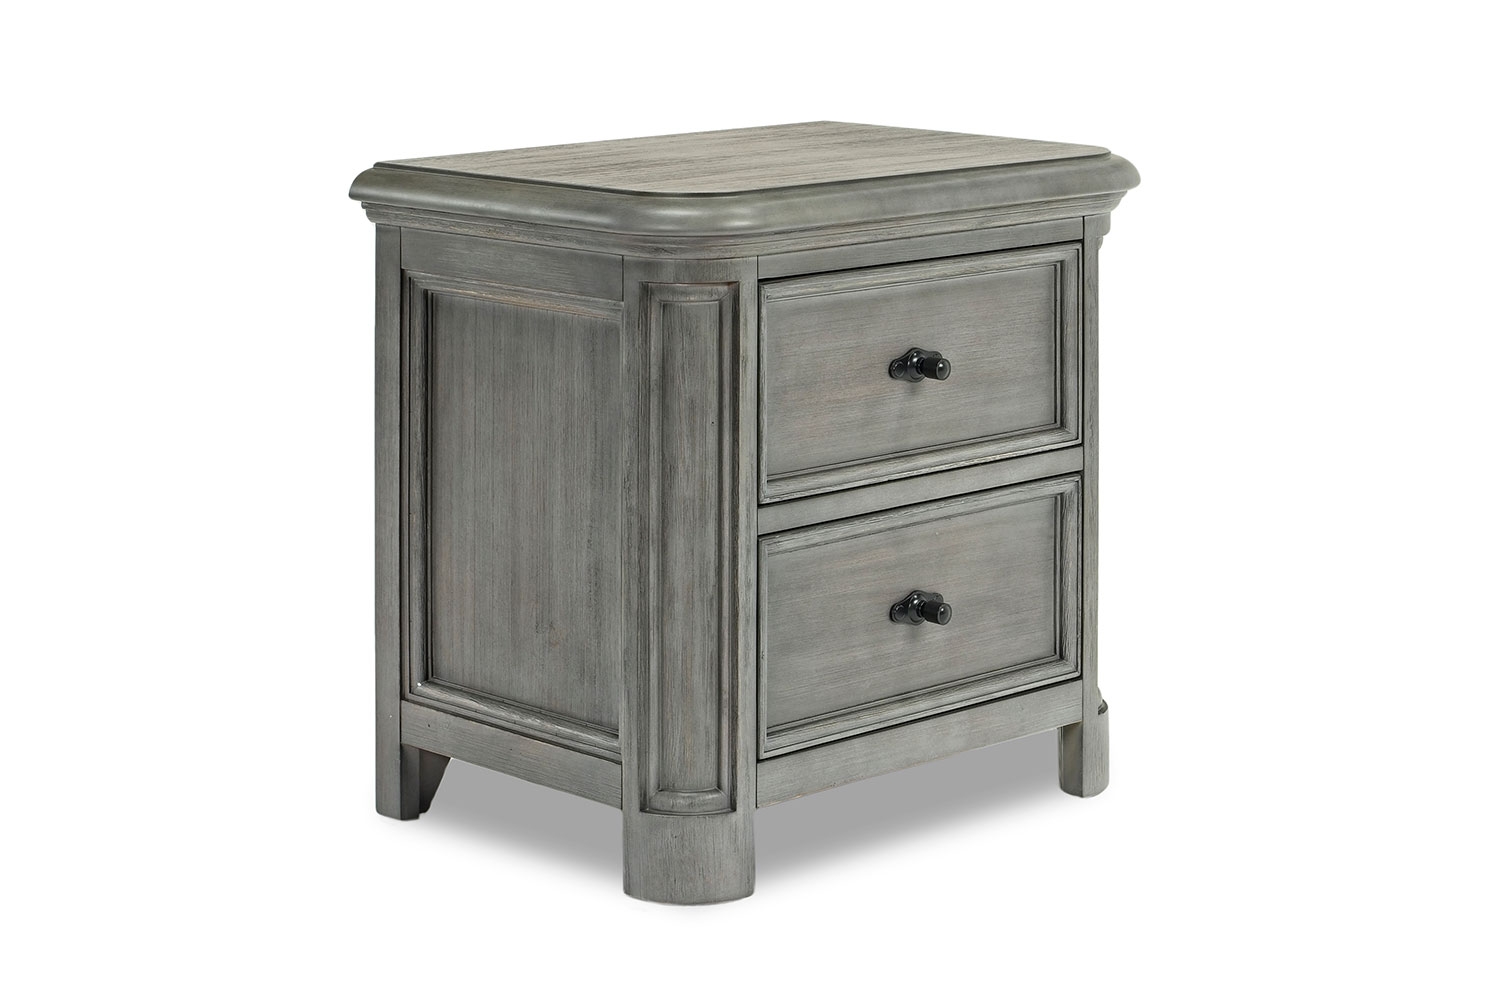 Costa Del Sol Nightstand with USB Charger in Gray Angled